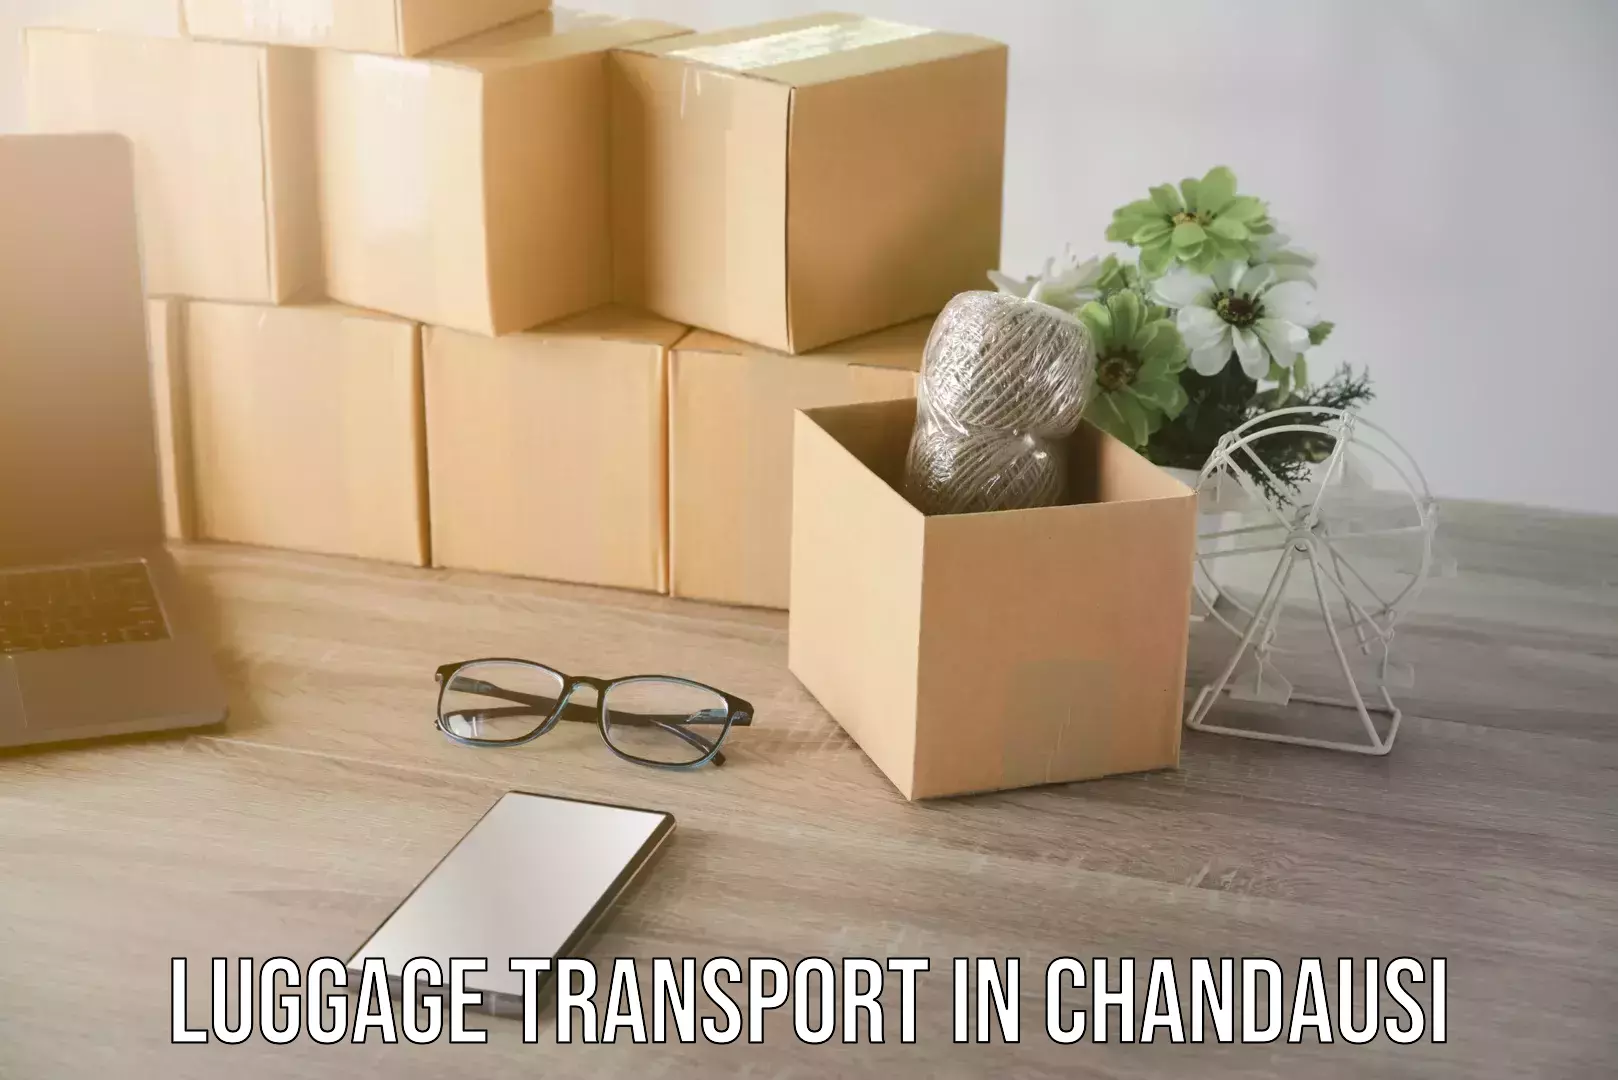 Baggage transport innovation in Chandausi